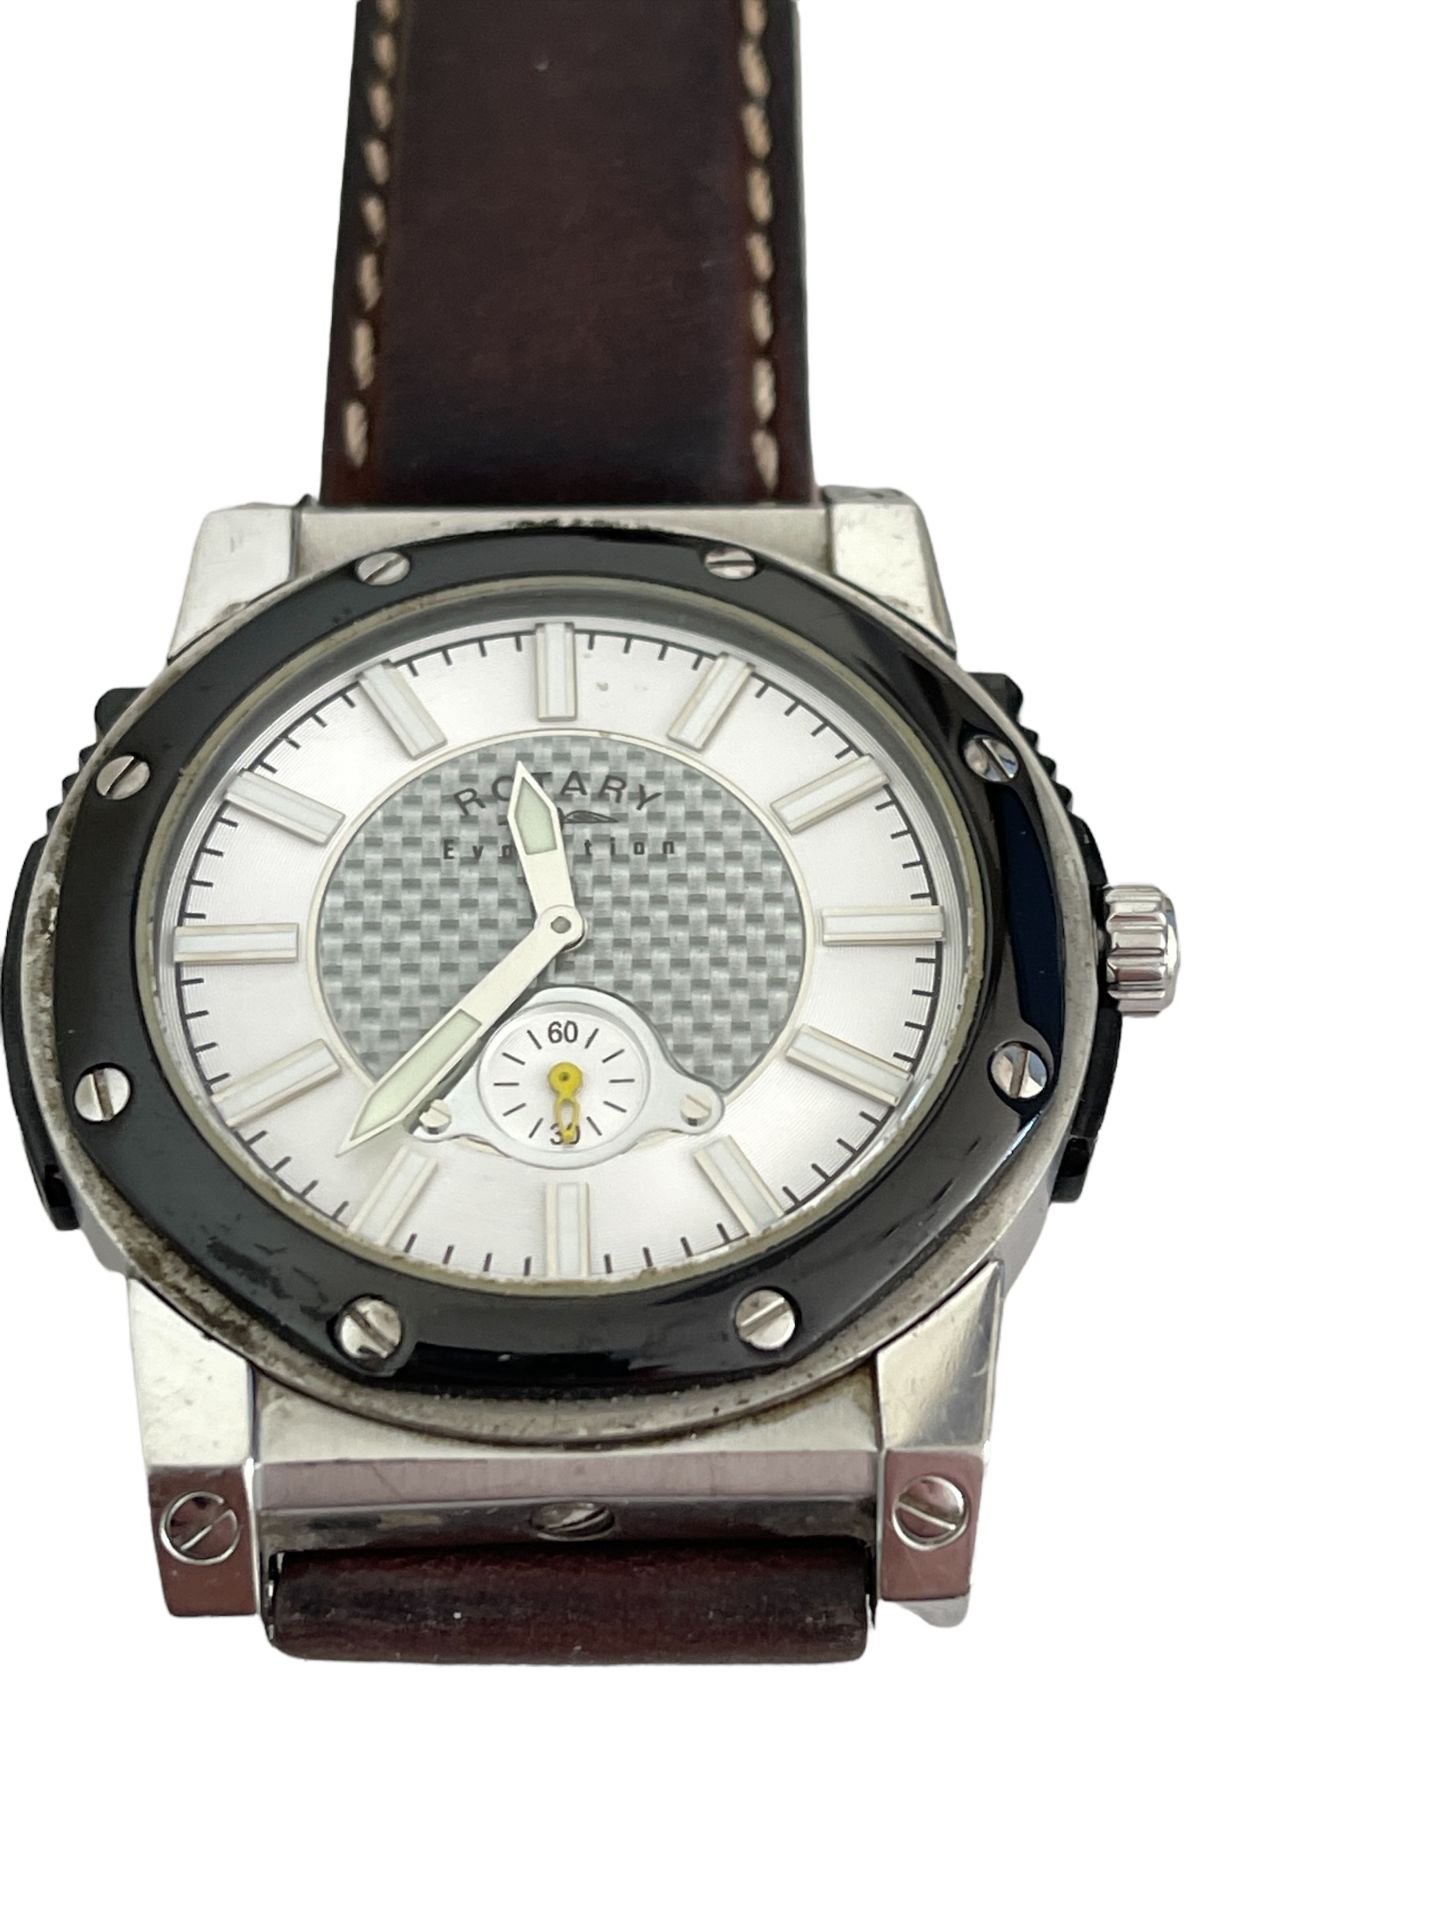 Men's Rotary Revelations Evolution Reversible Watch - Ex Demo/Return Stock from Private Jet Charter. - Image 8 of 12